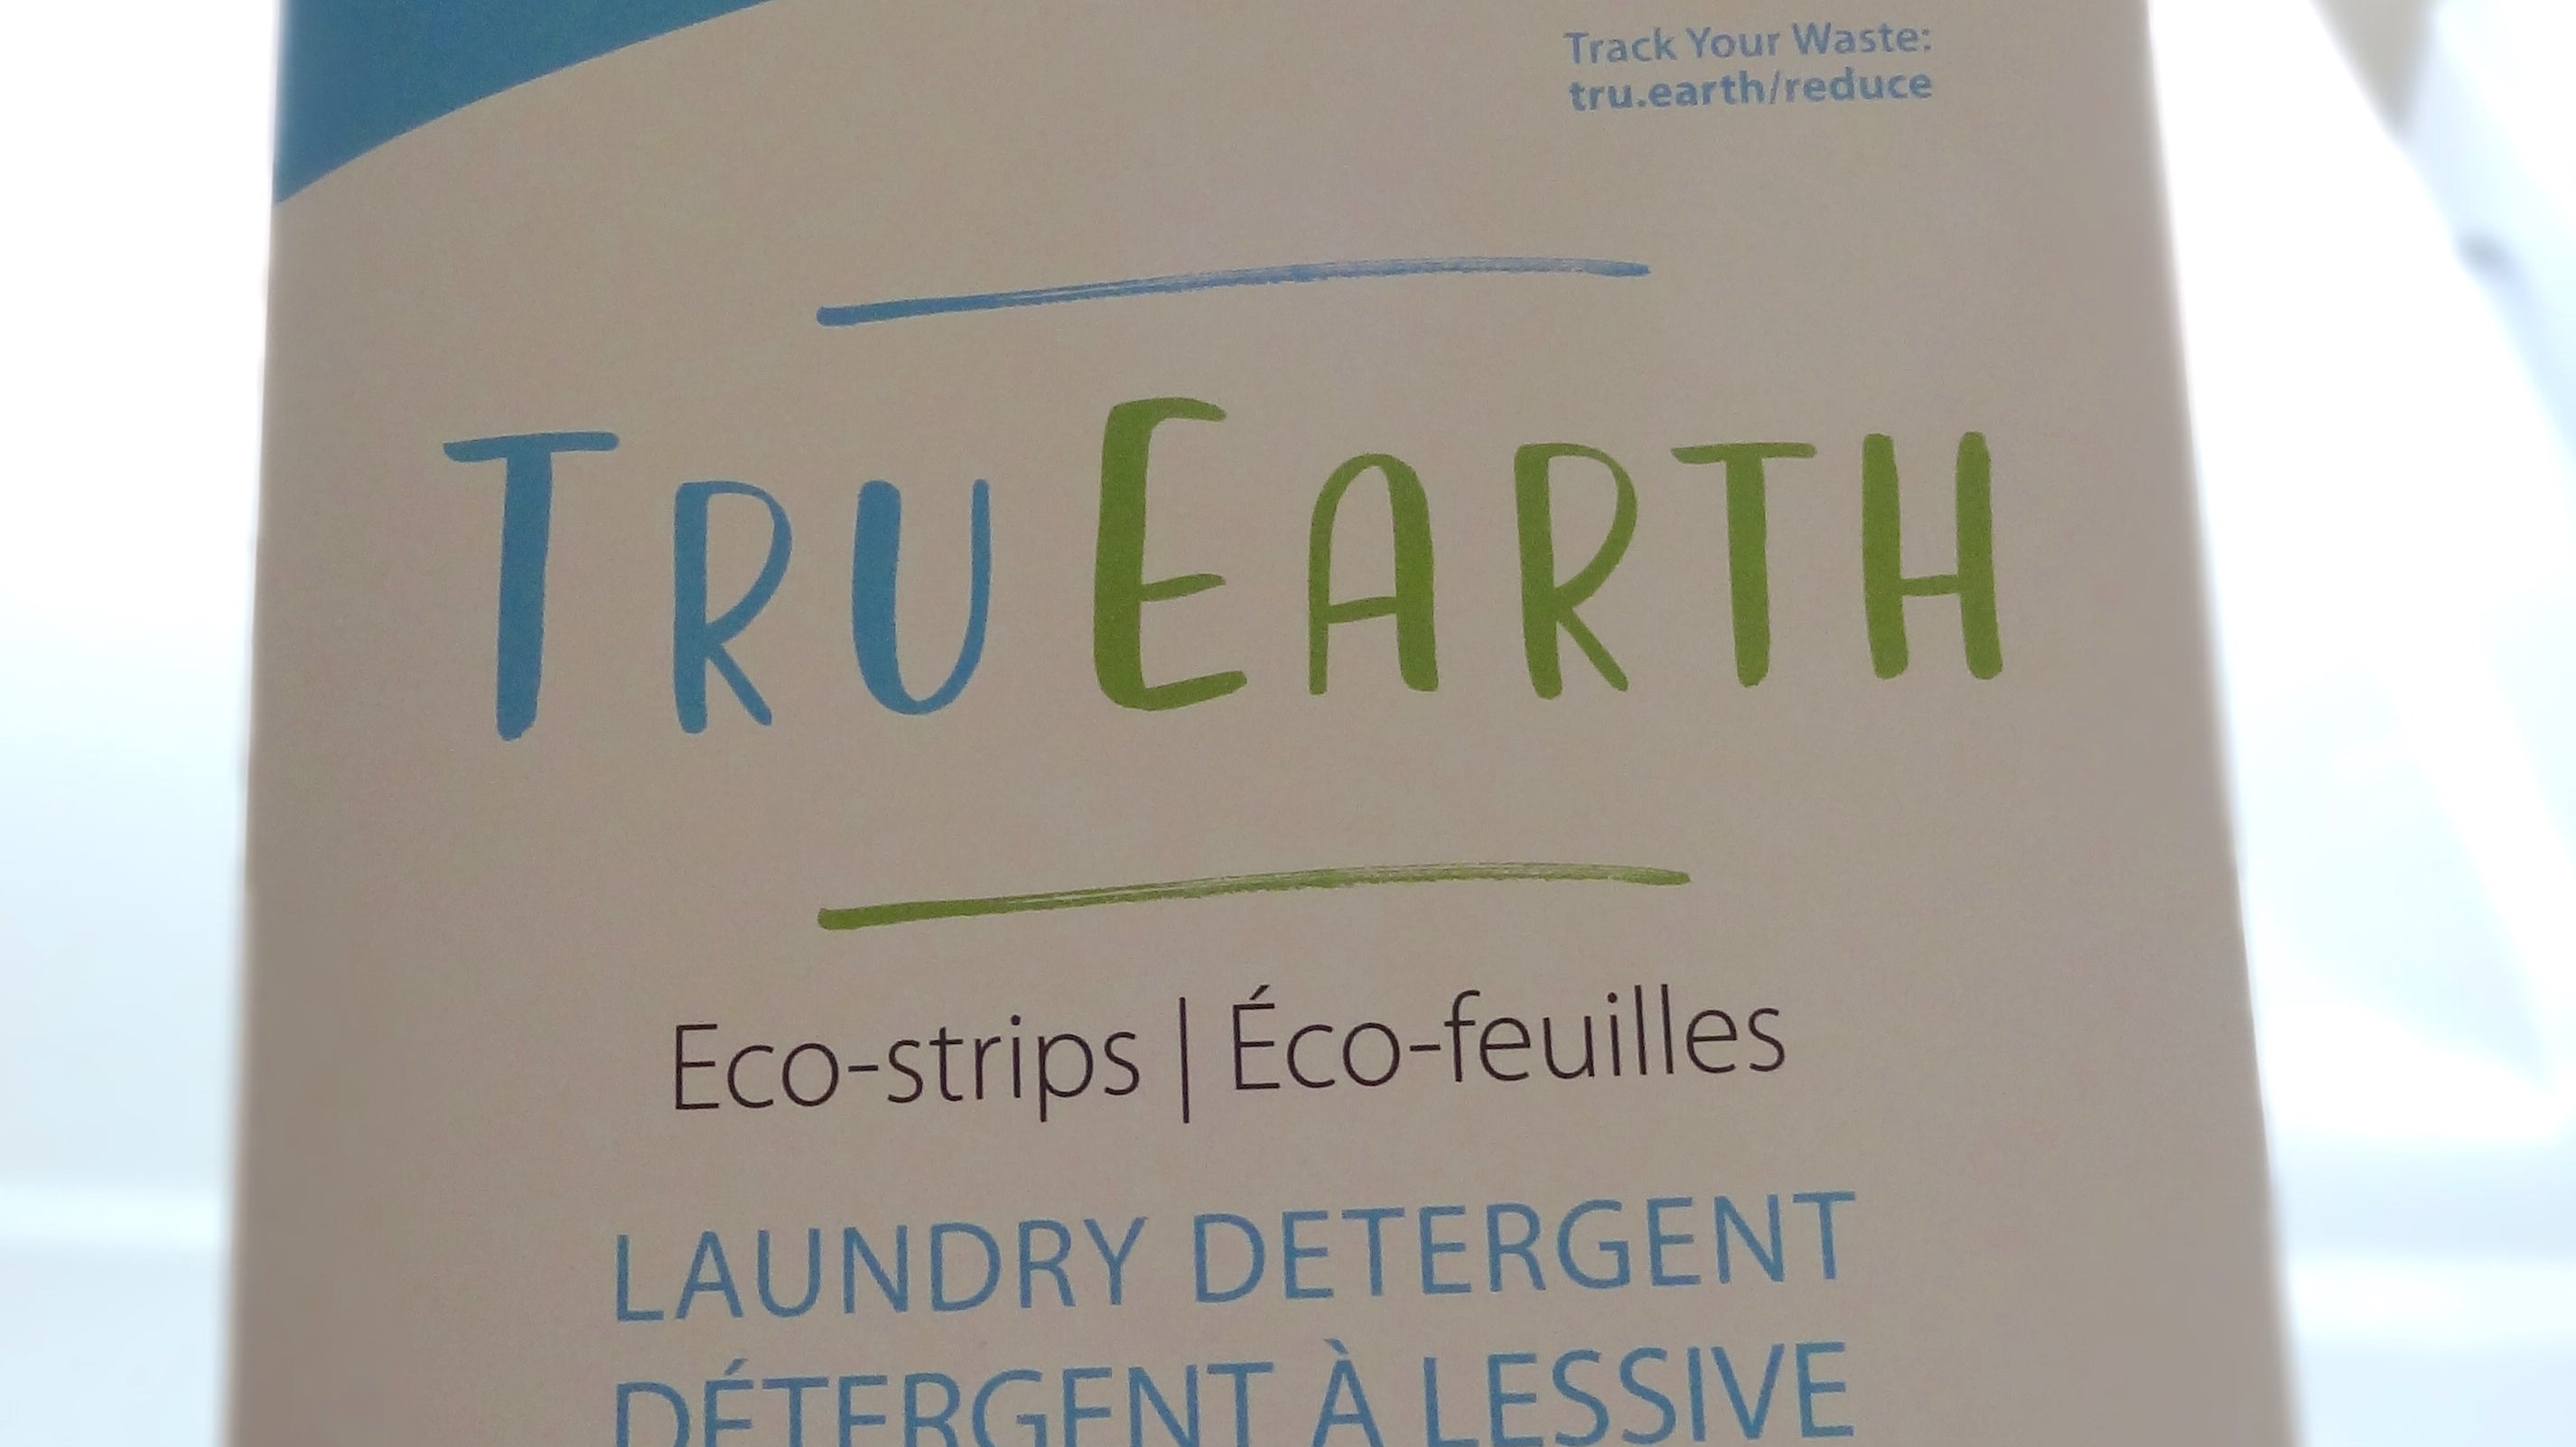 Tru Earth - Truly Eco-Friendly Laundry Detergent!